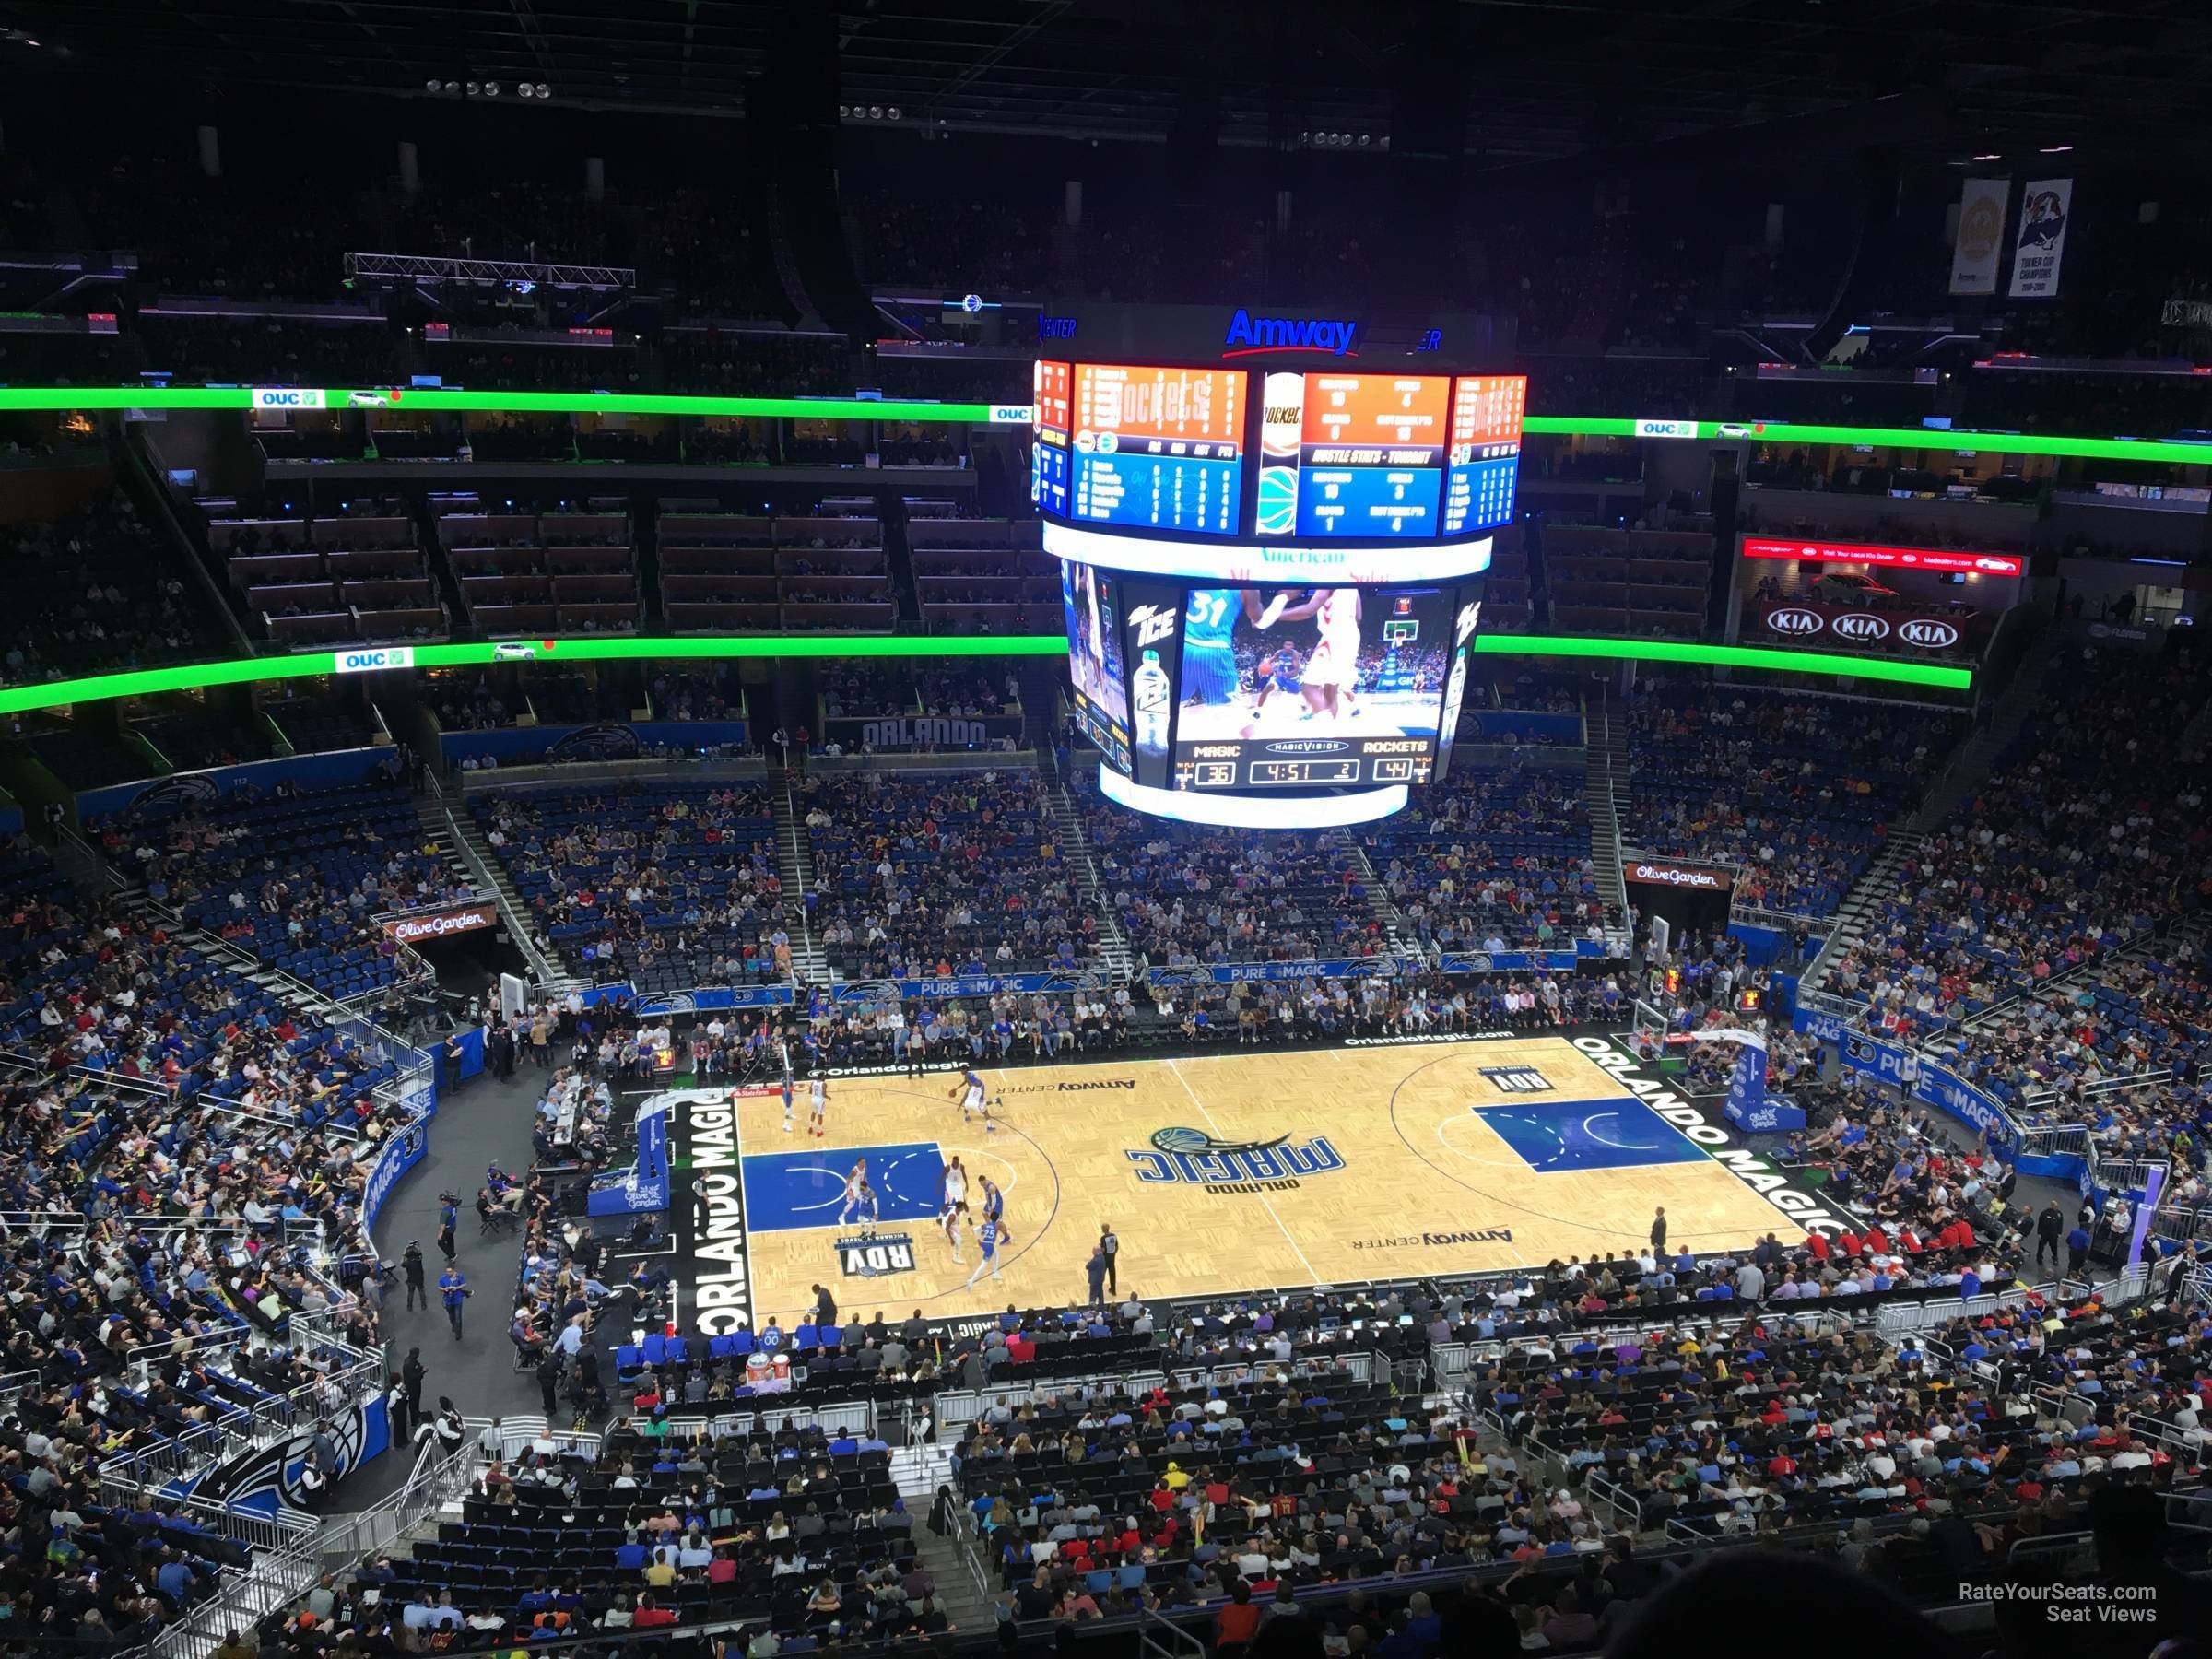 section 210, row 5 seat view  for basketball - amway center